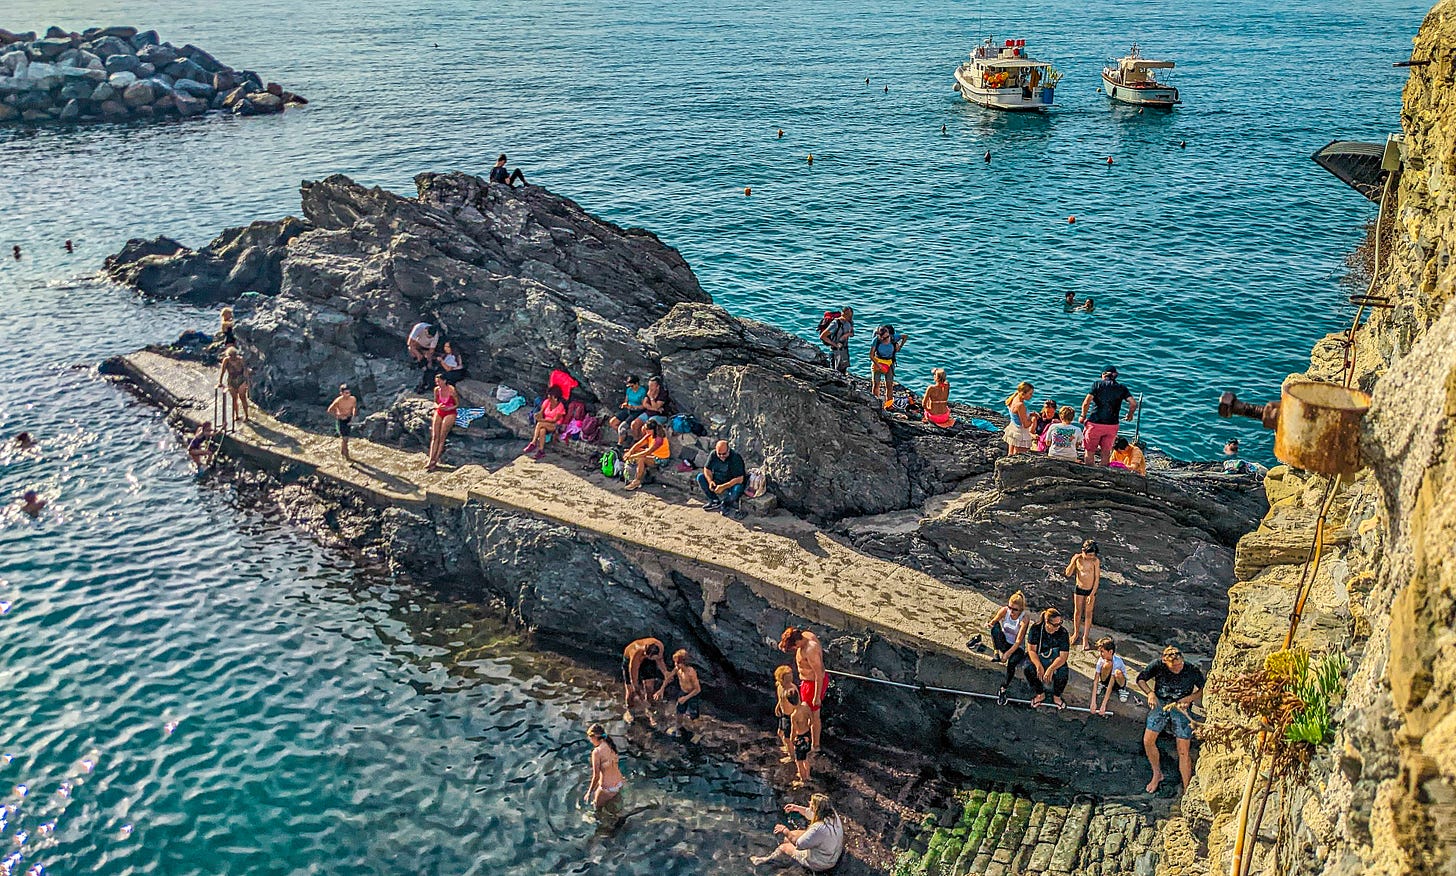 A rock juts out into the blue harbor, swimmers in the water while others sit on the rock. 